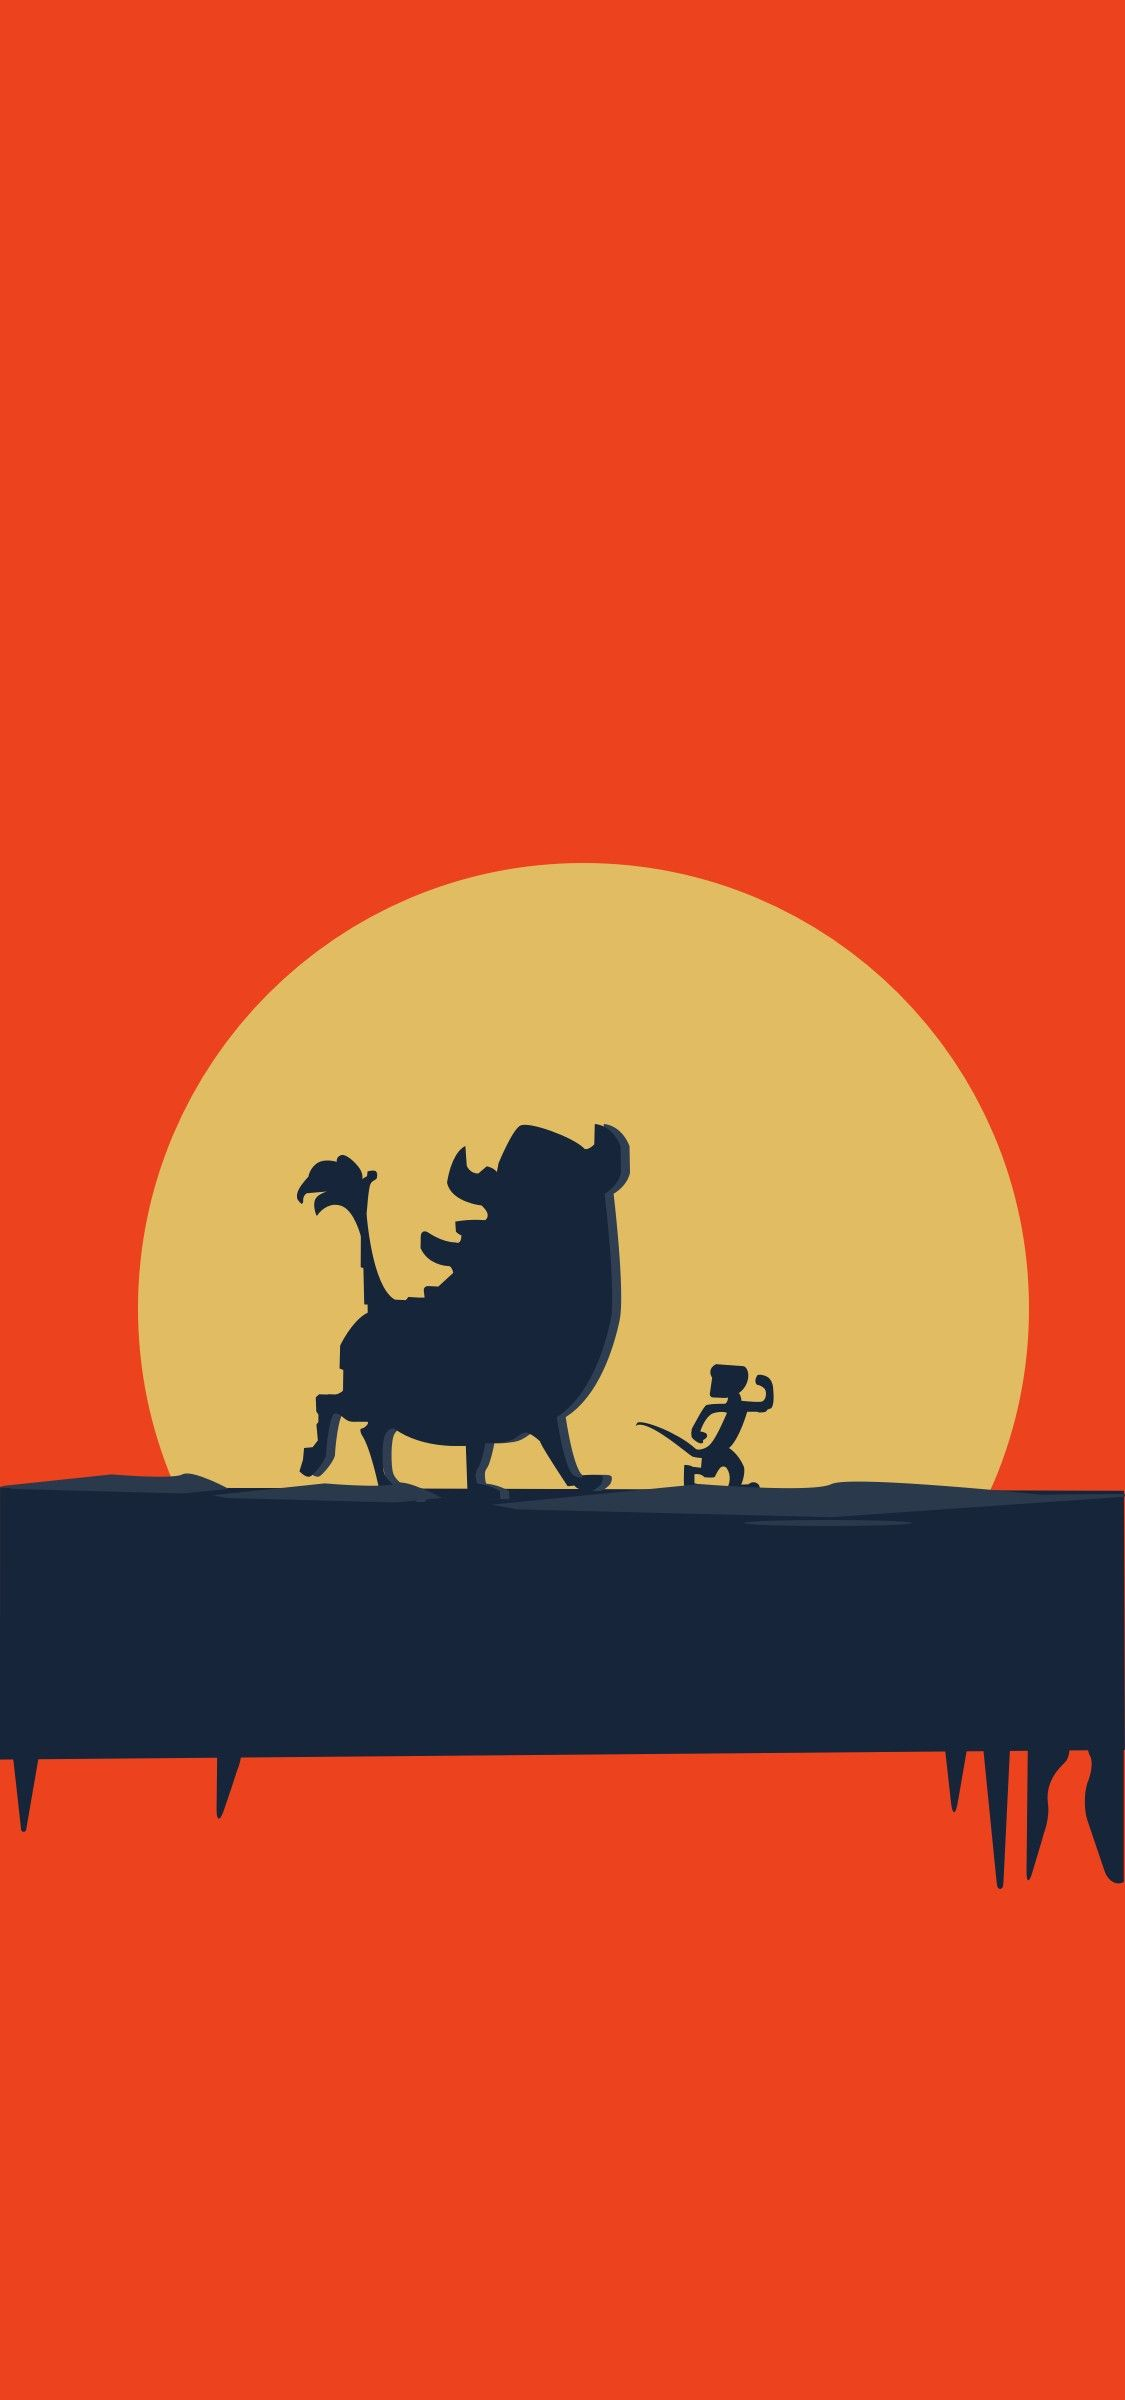 1125x2400 Timon and Pumba The Lion King HD Mobile Wallpaper. | Disney wallpaper, Timon, Hd wallpaper